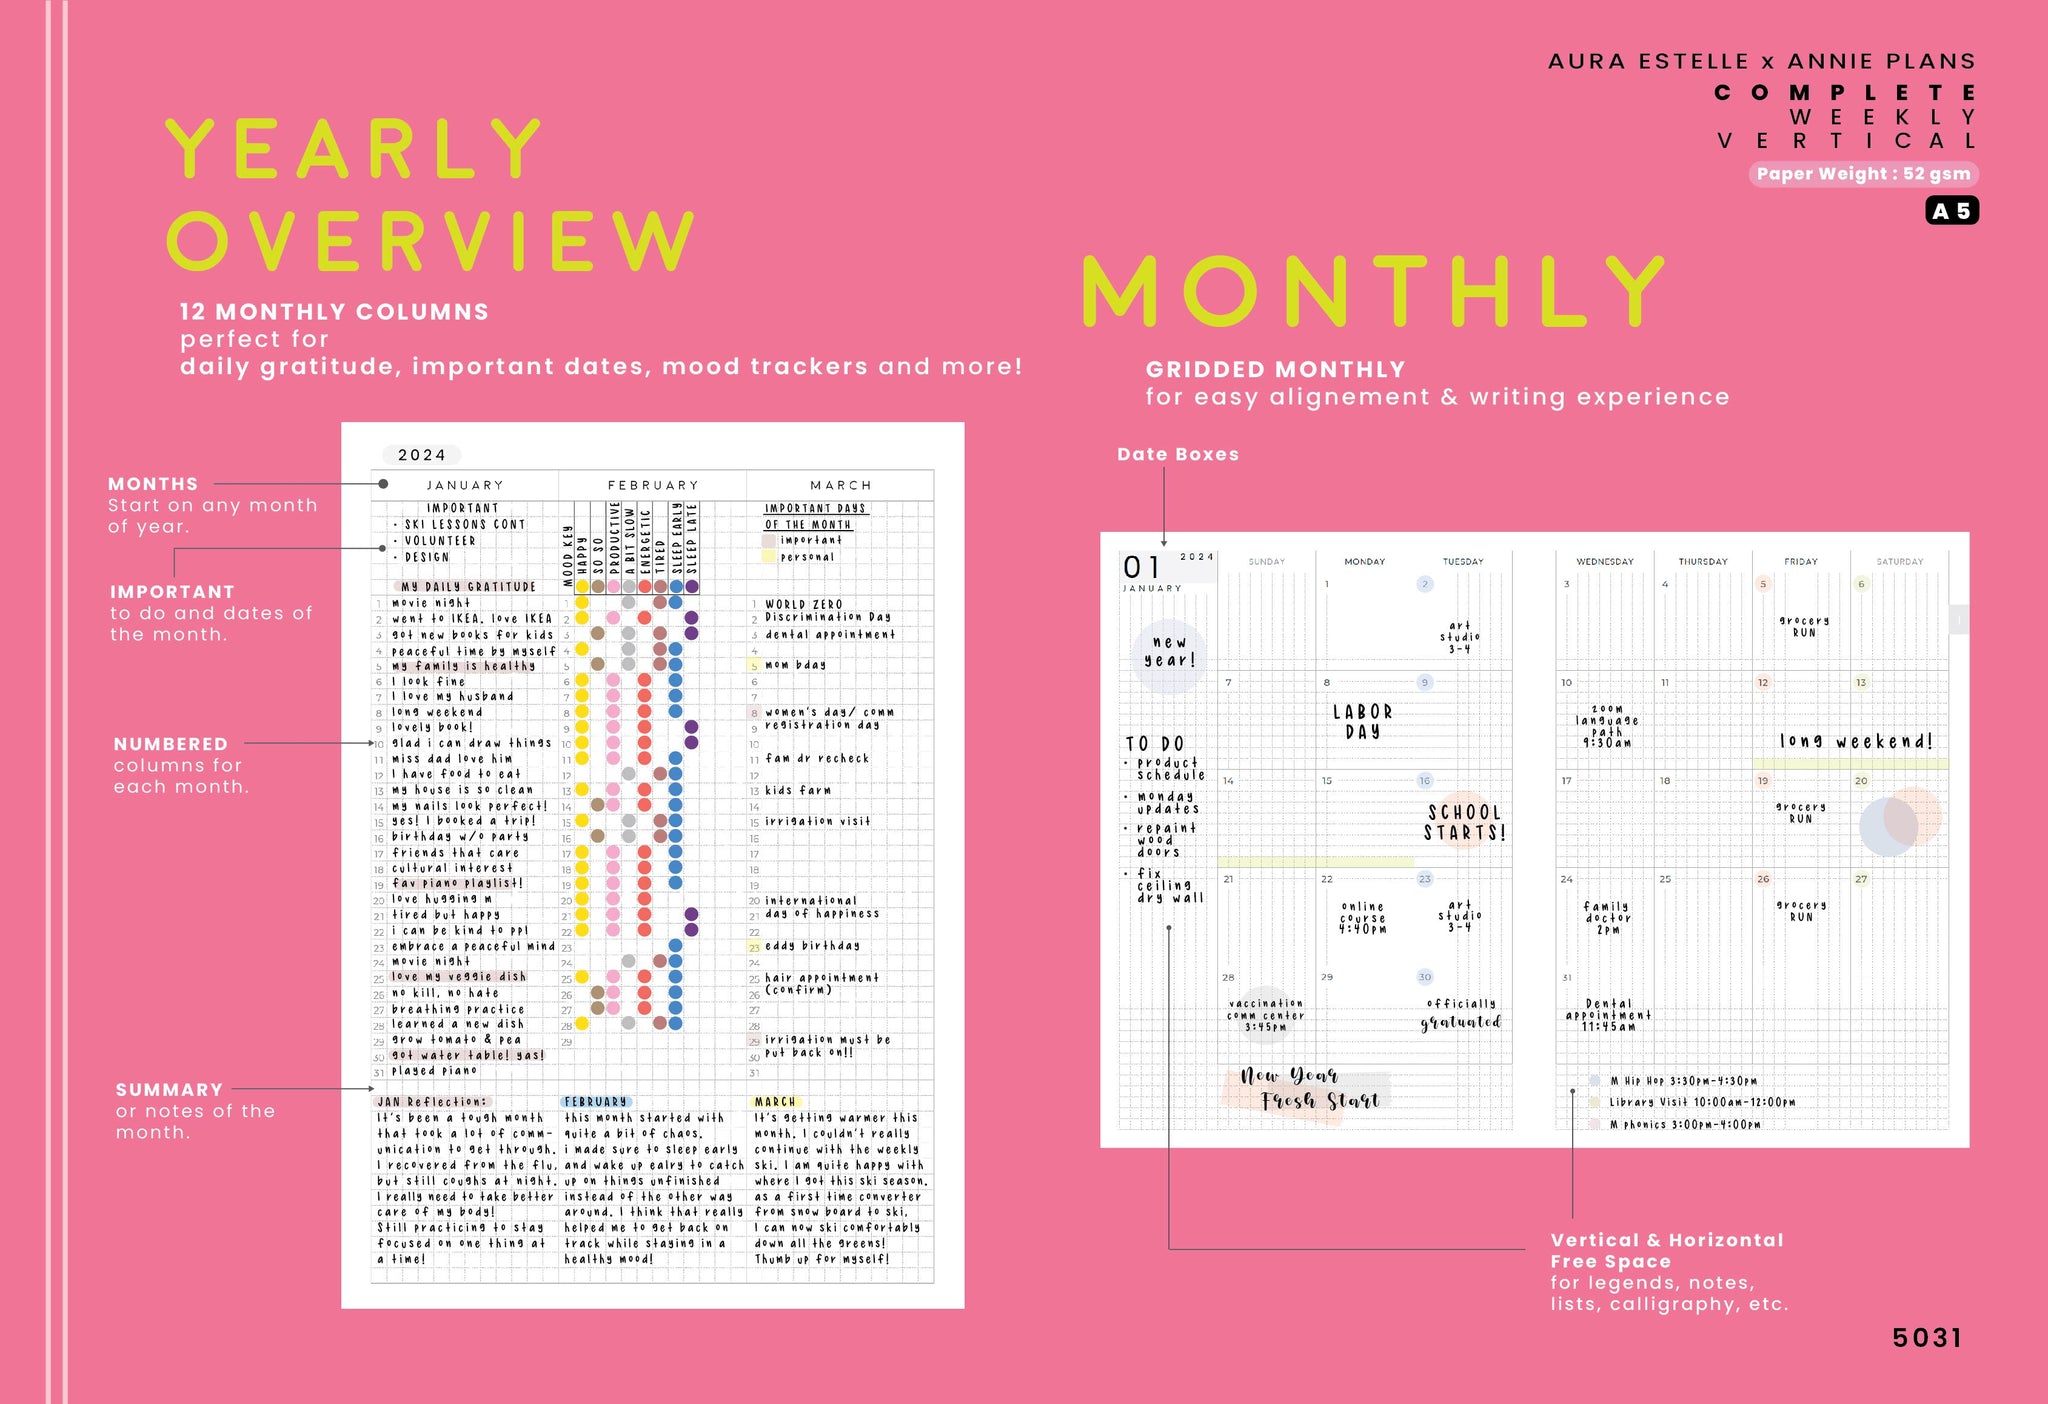 aura_estelle_A5_weekly_complete_planner_spread